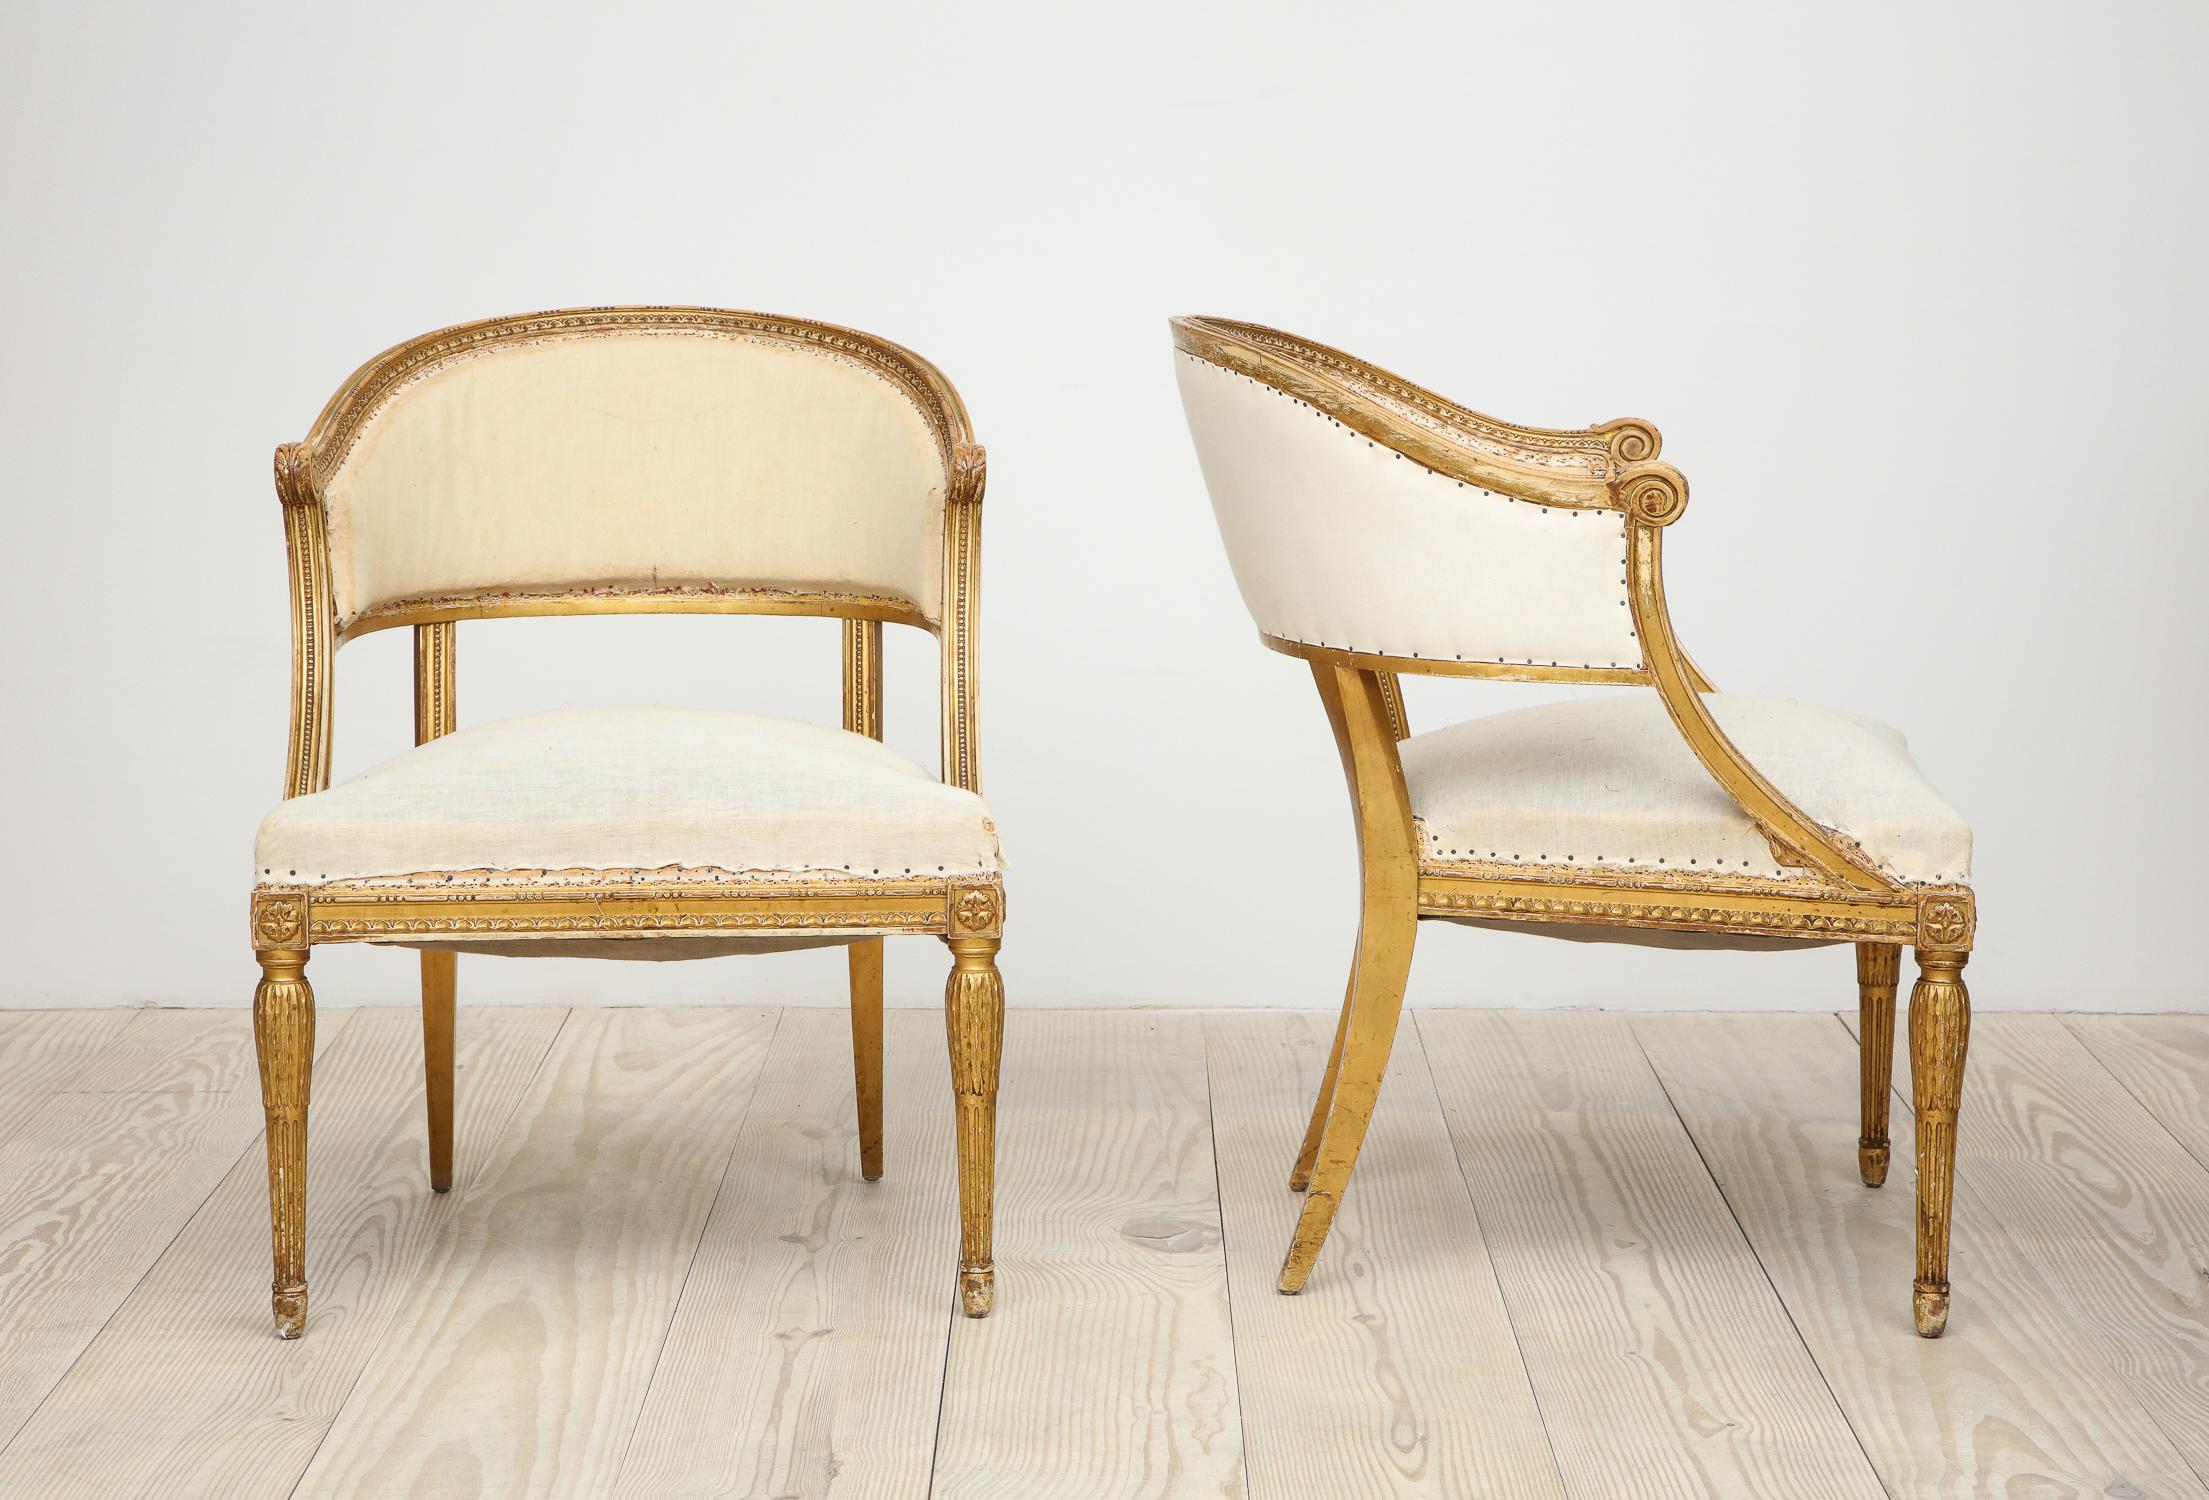 Swedish 18th Century Giltwood Gustavian Bucket Chairs, Set of 4, Sweden, Circa 1790-1800 For Sale